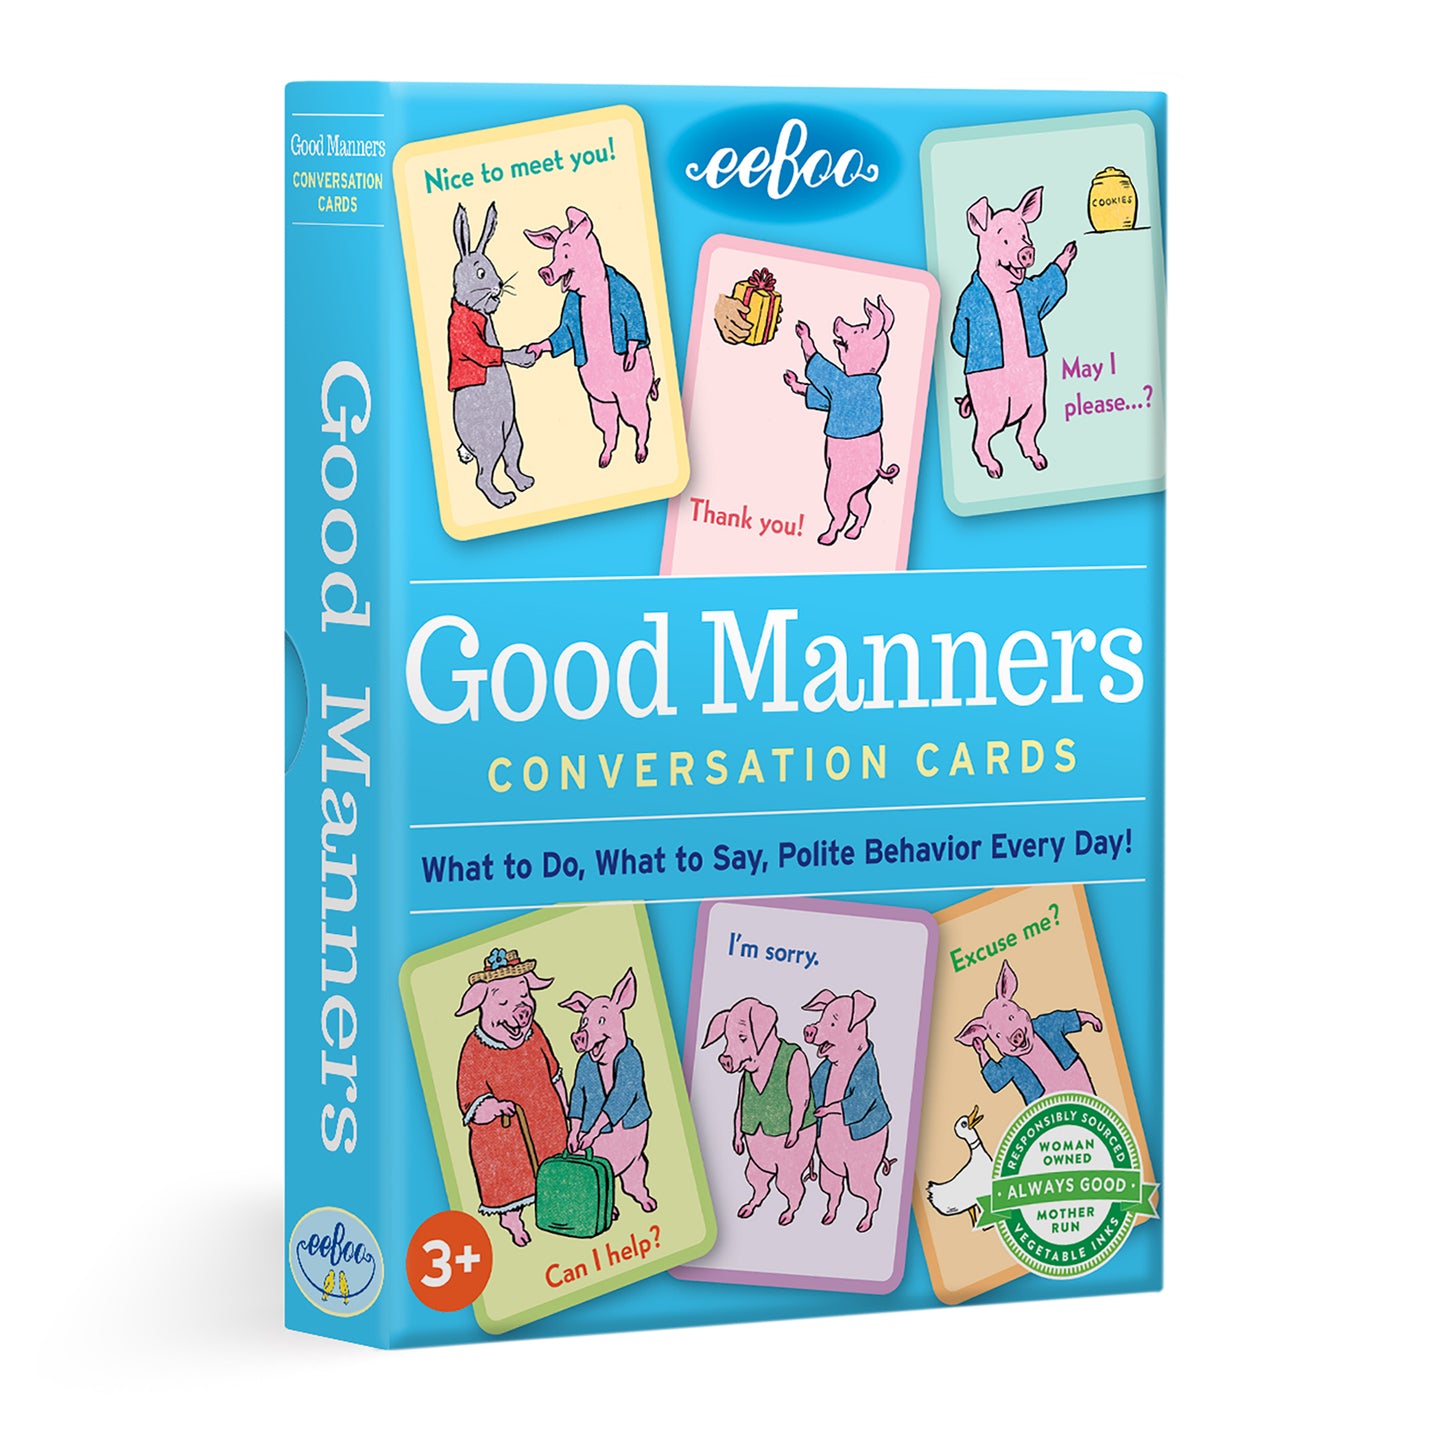 Good Manners Social Emotional Flash Cards by eeBoo for Kids Ages 3+